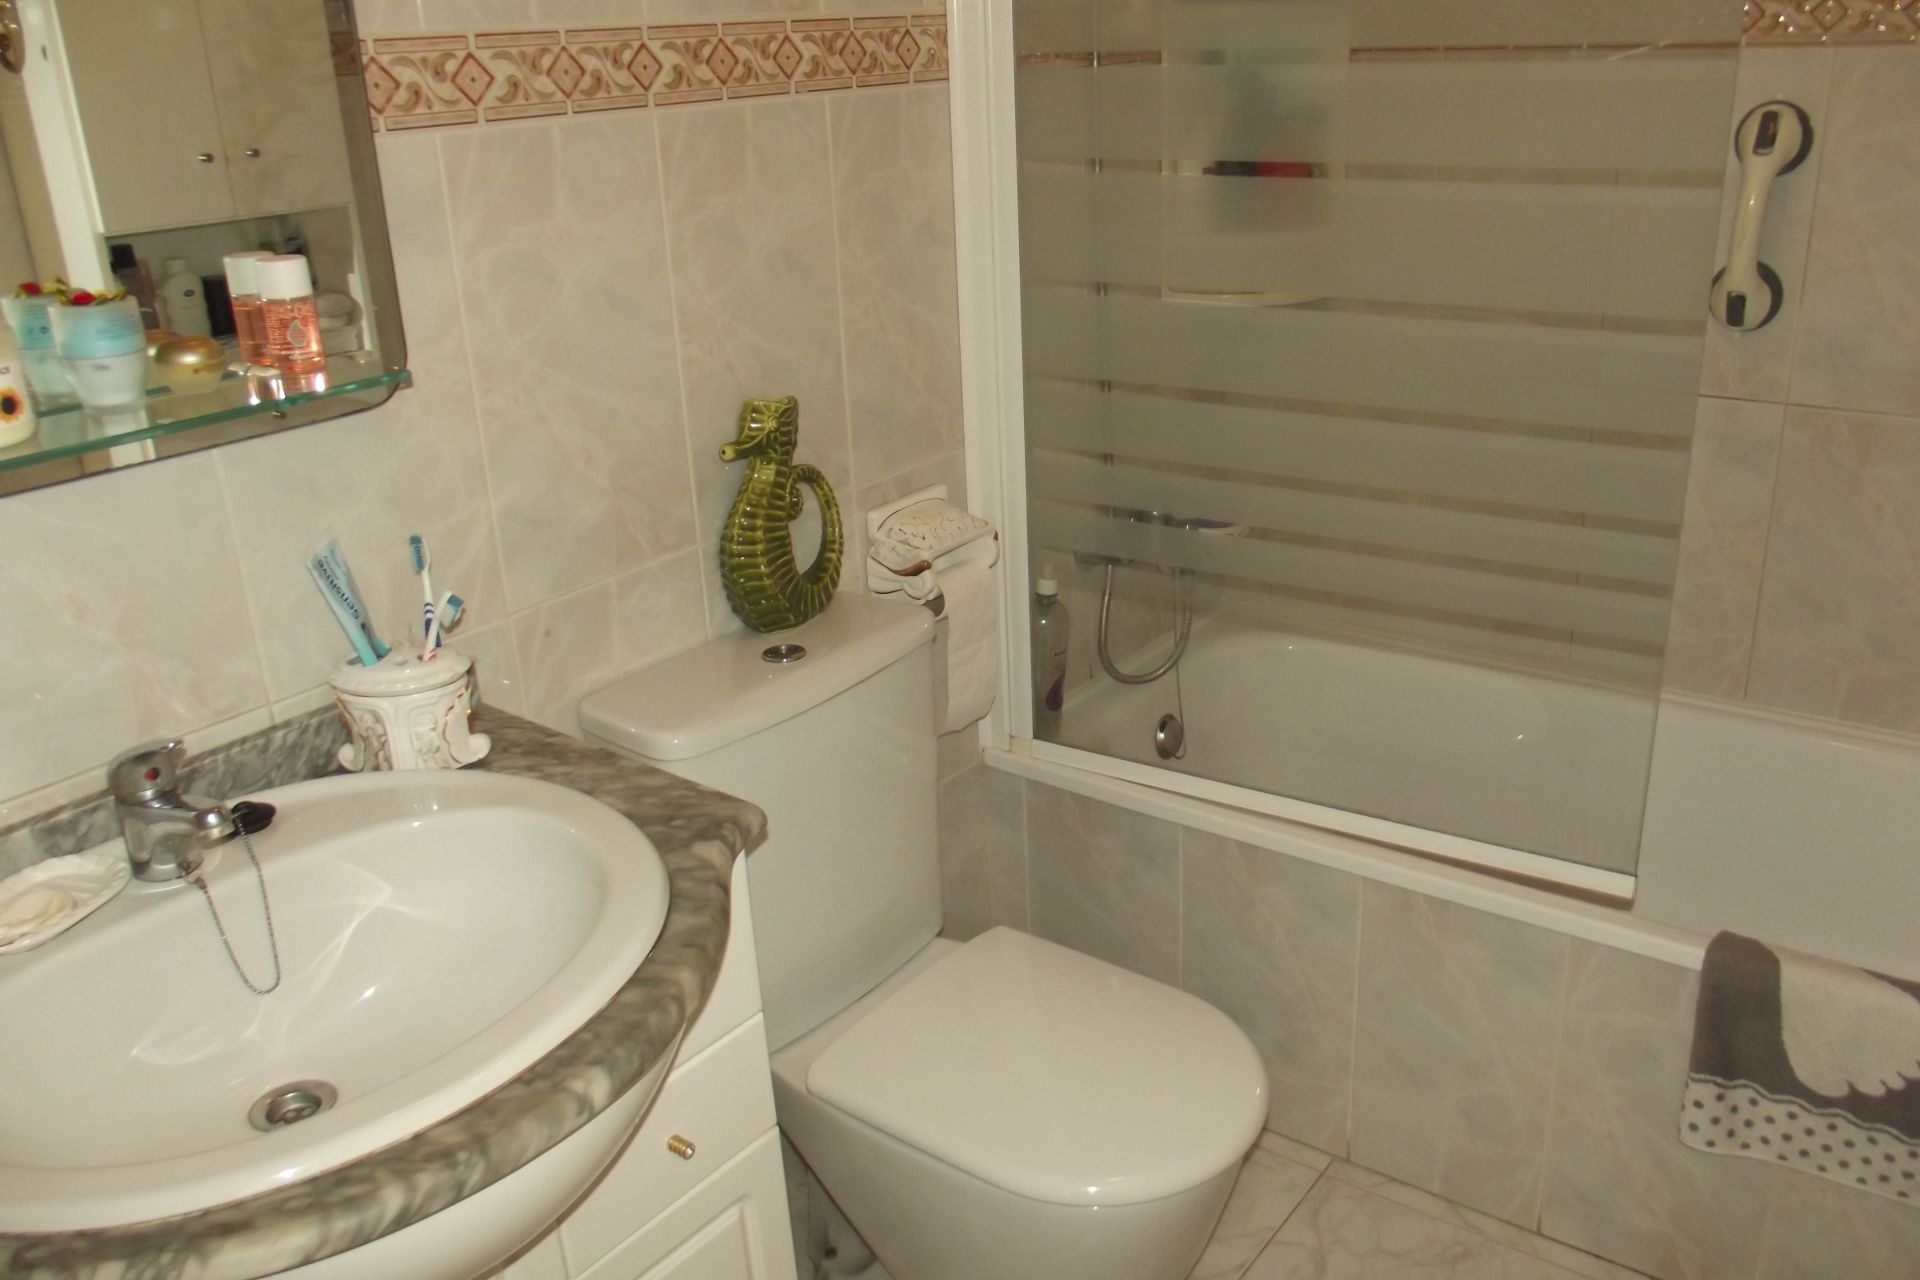 Property on Hold - Townhouse for sale - Torrevieja - Torrevieja Town Centre